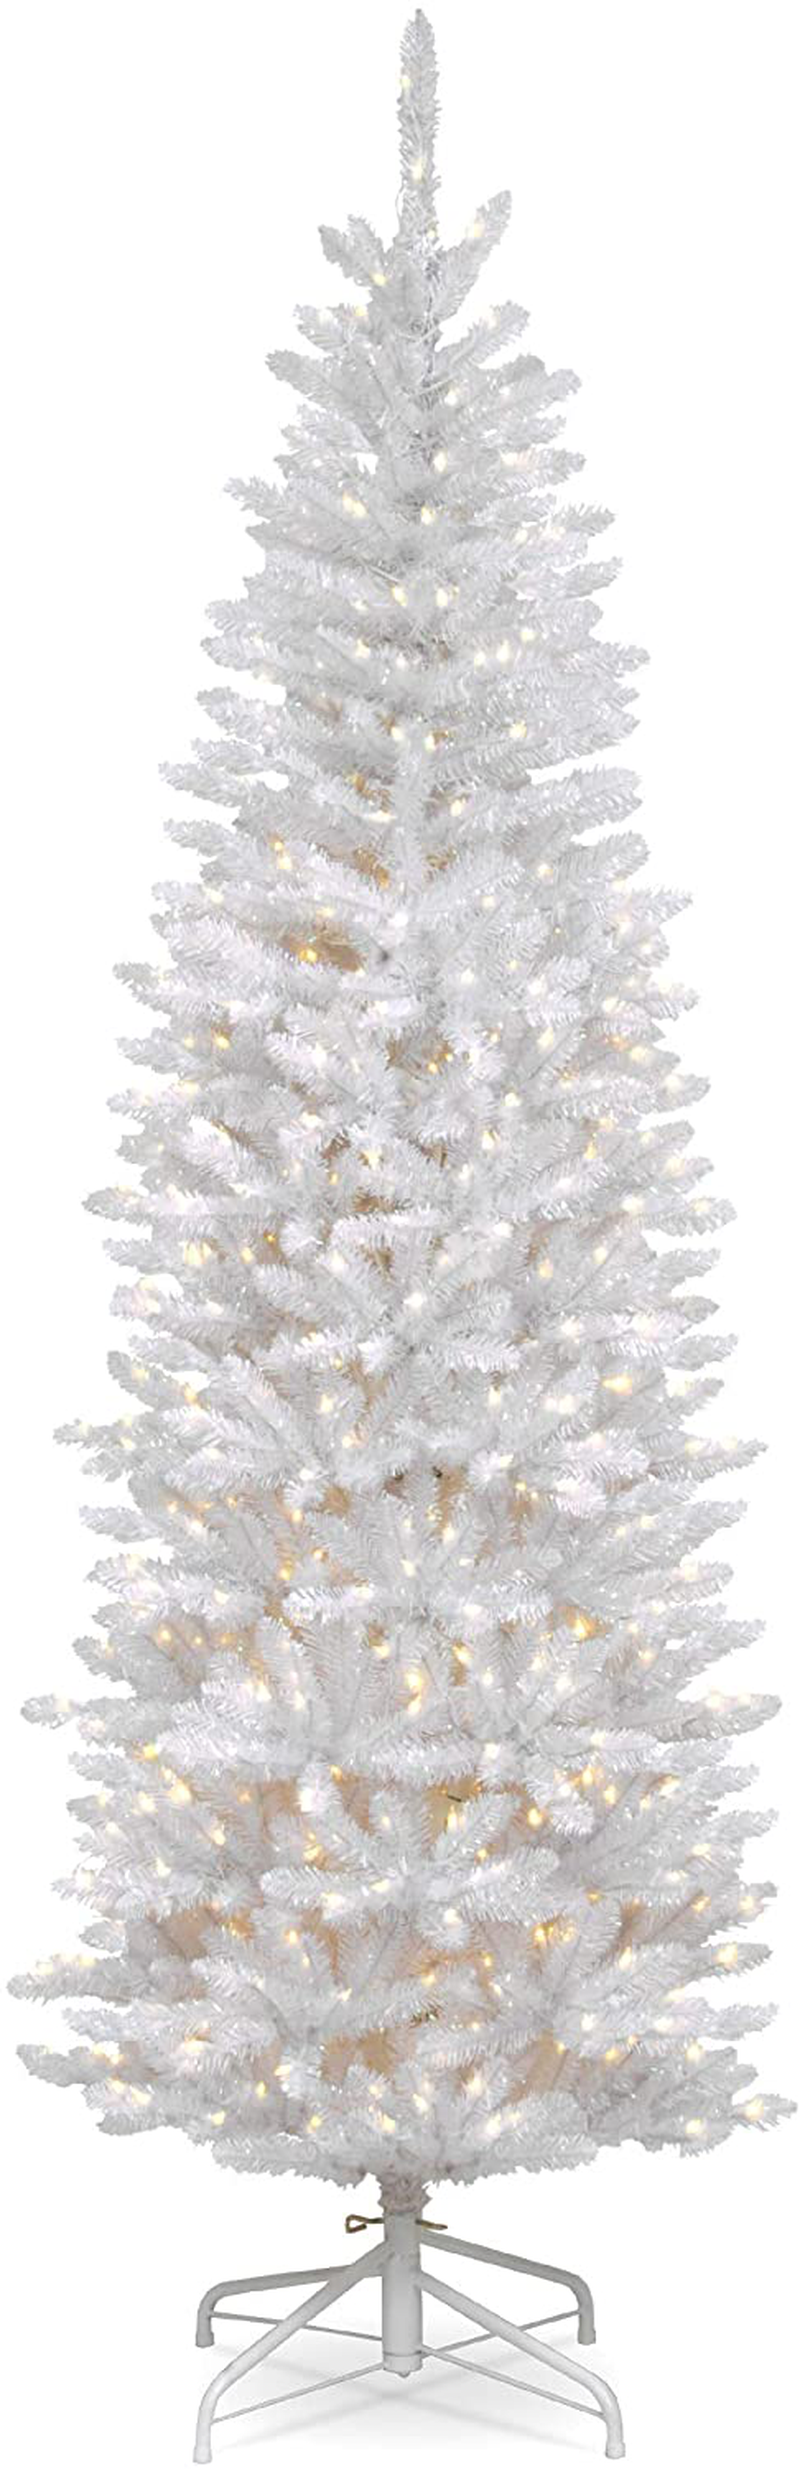 National Tree Company Pre-lit Artificial Christmas Tree Includes Strung White Lights and Stand Kingswood Fir Pencil-10, 10 ft Home & Garden > Decor > Seasonal & Holiday Decorations > Christmas Tree Stands National Tree Company Tree 6.5 ft 